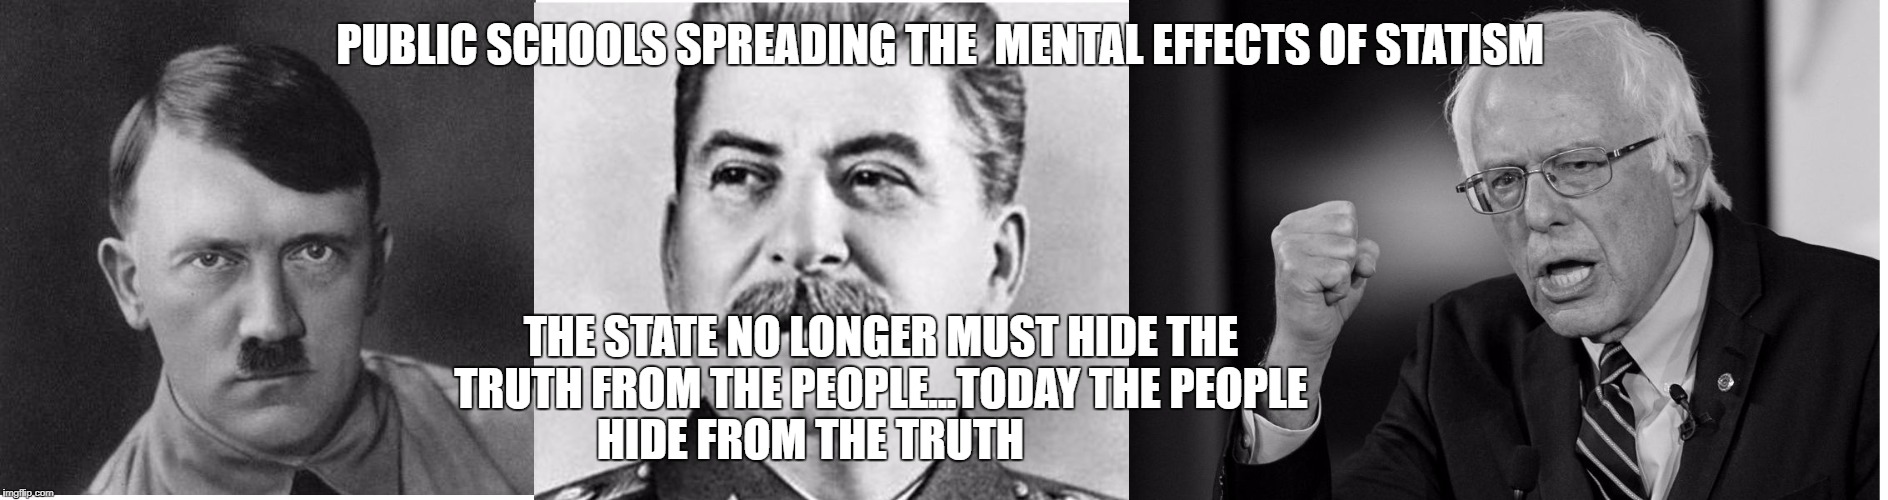 Hitler, Stalin, and Sanders | THE STATE NO LONGER MUST HIDE THE TRUTH FROM THE PEOPLE...TODAY THE PEOPLE HIDE FROM THE TRUTH; PUBLIC SCHOOLS SPREADING THE  MENTAL EFFECTS OF STATISM | image tagged in hitler stalin and sanders | made w/ Imgflip meme maker